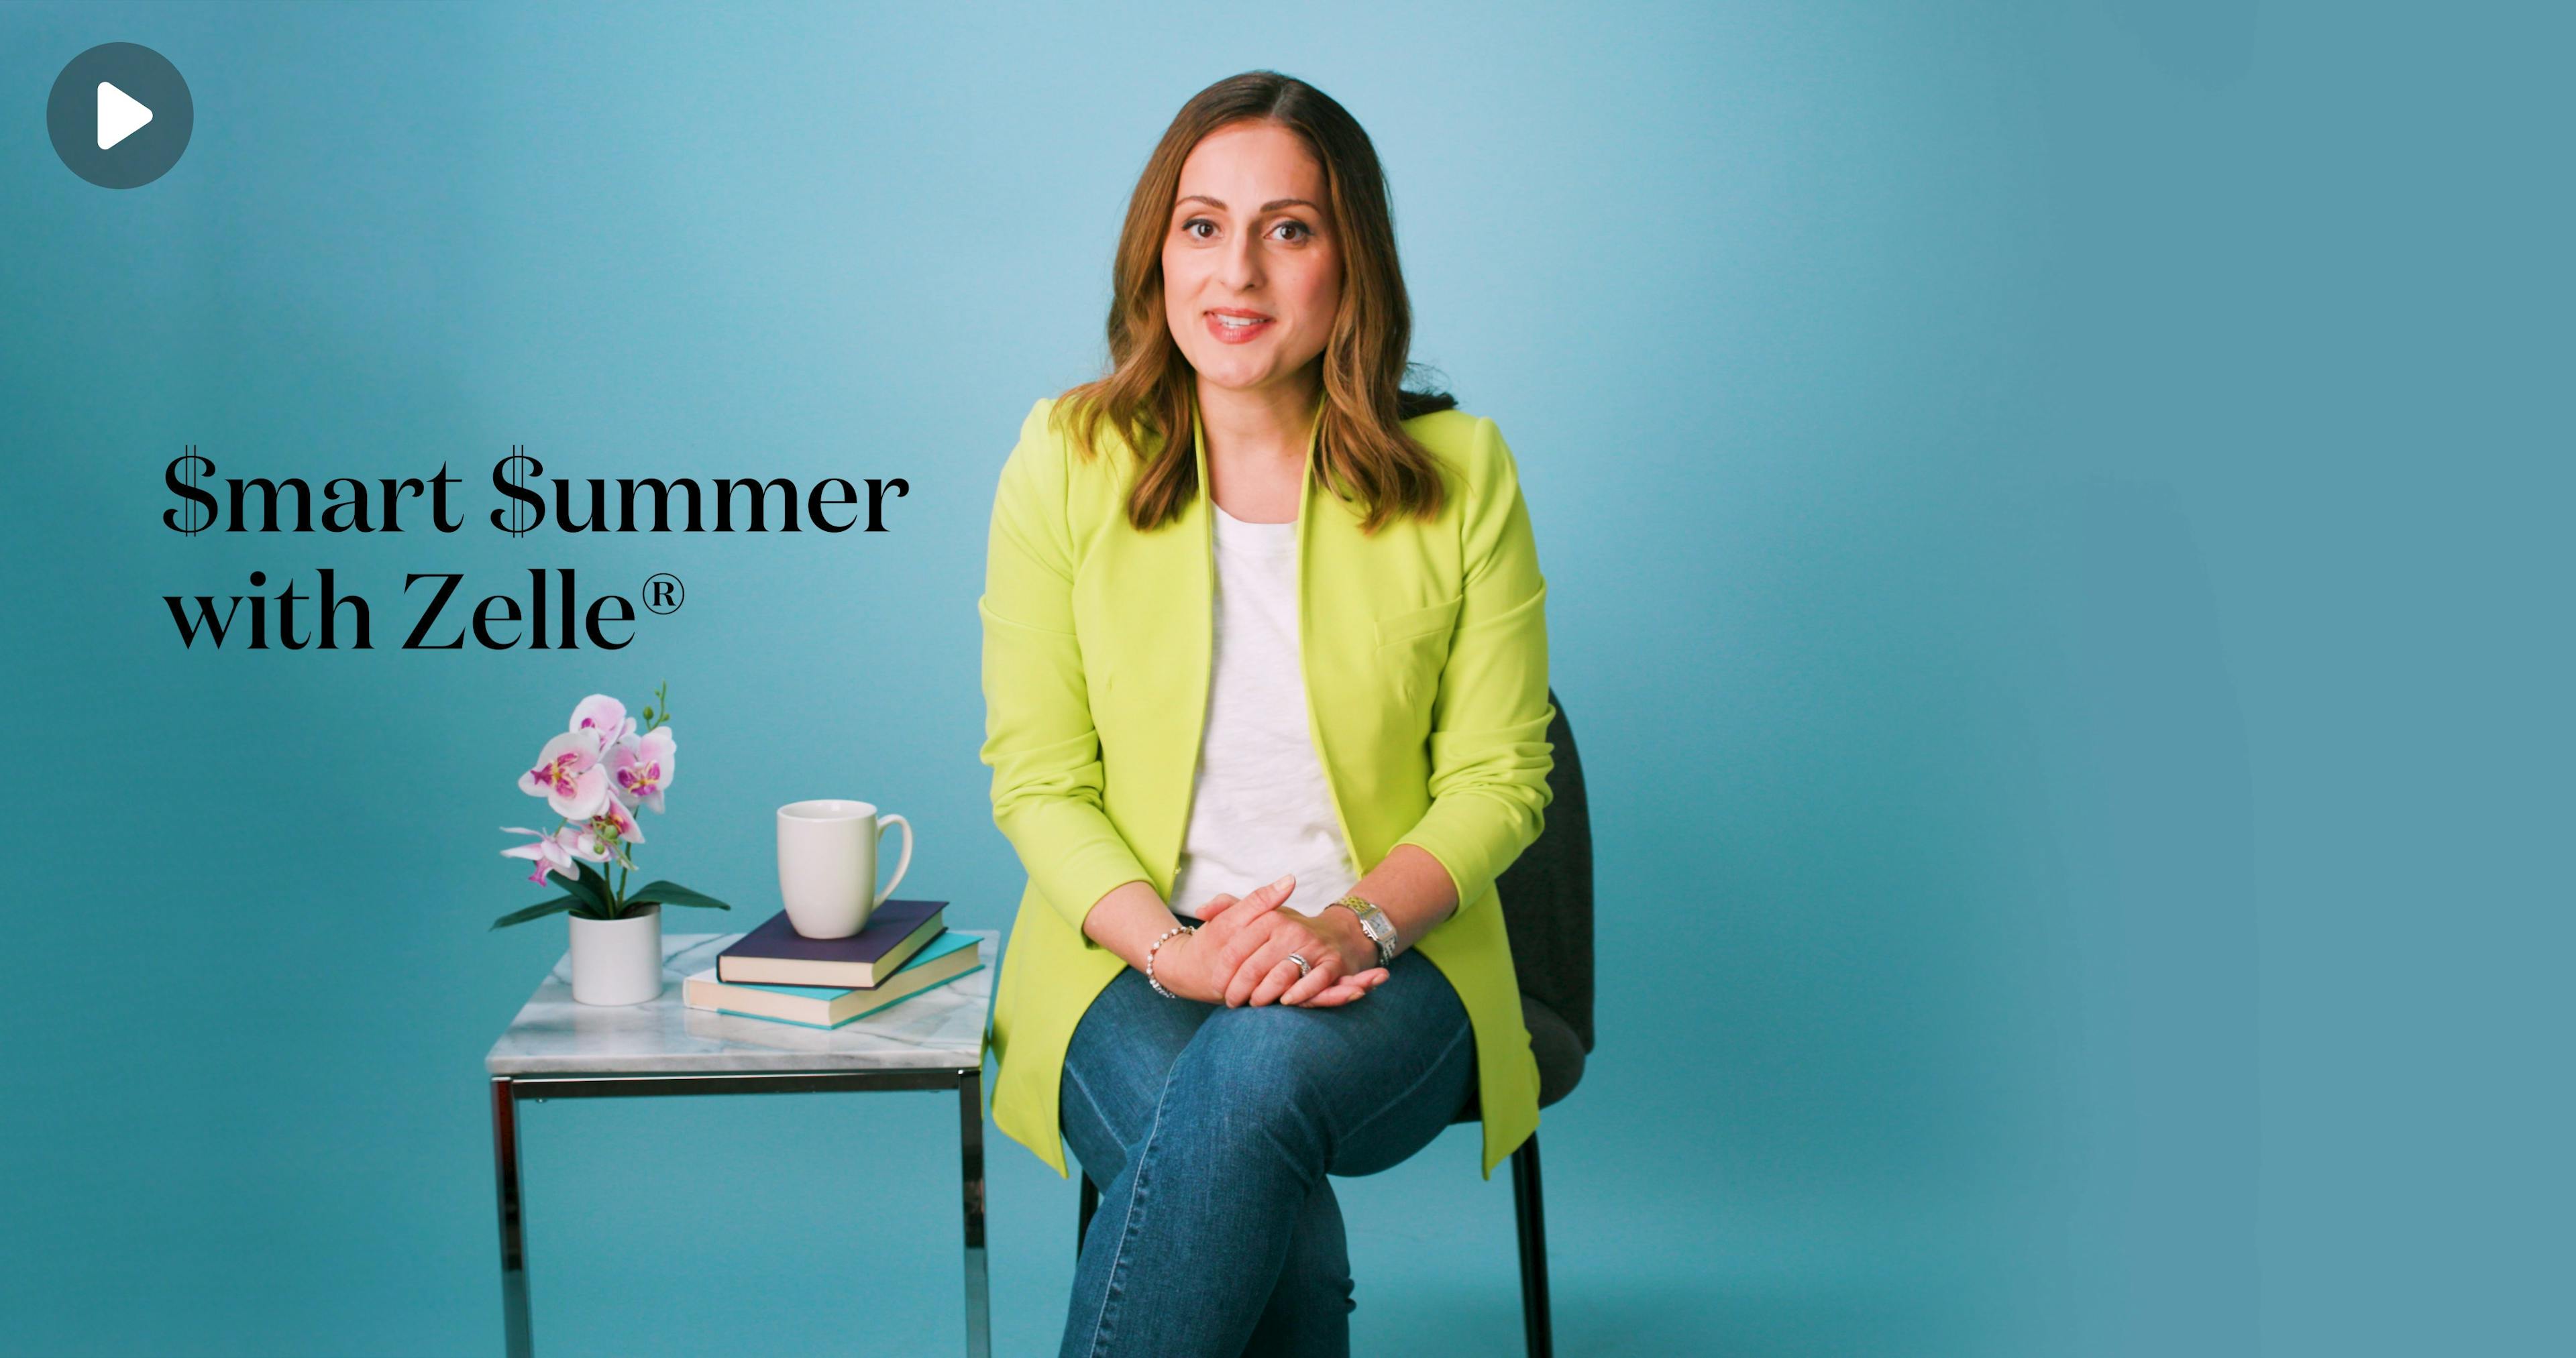 Expert Farnoosh Torabi sits in a chair in front of a teal background next to a side table with flowers, books, and a mug